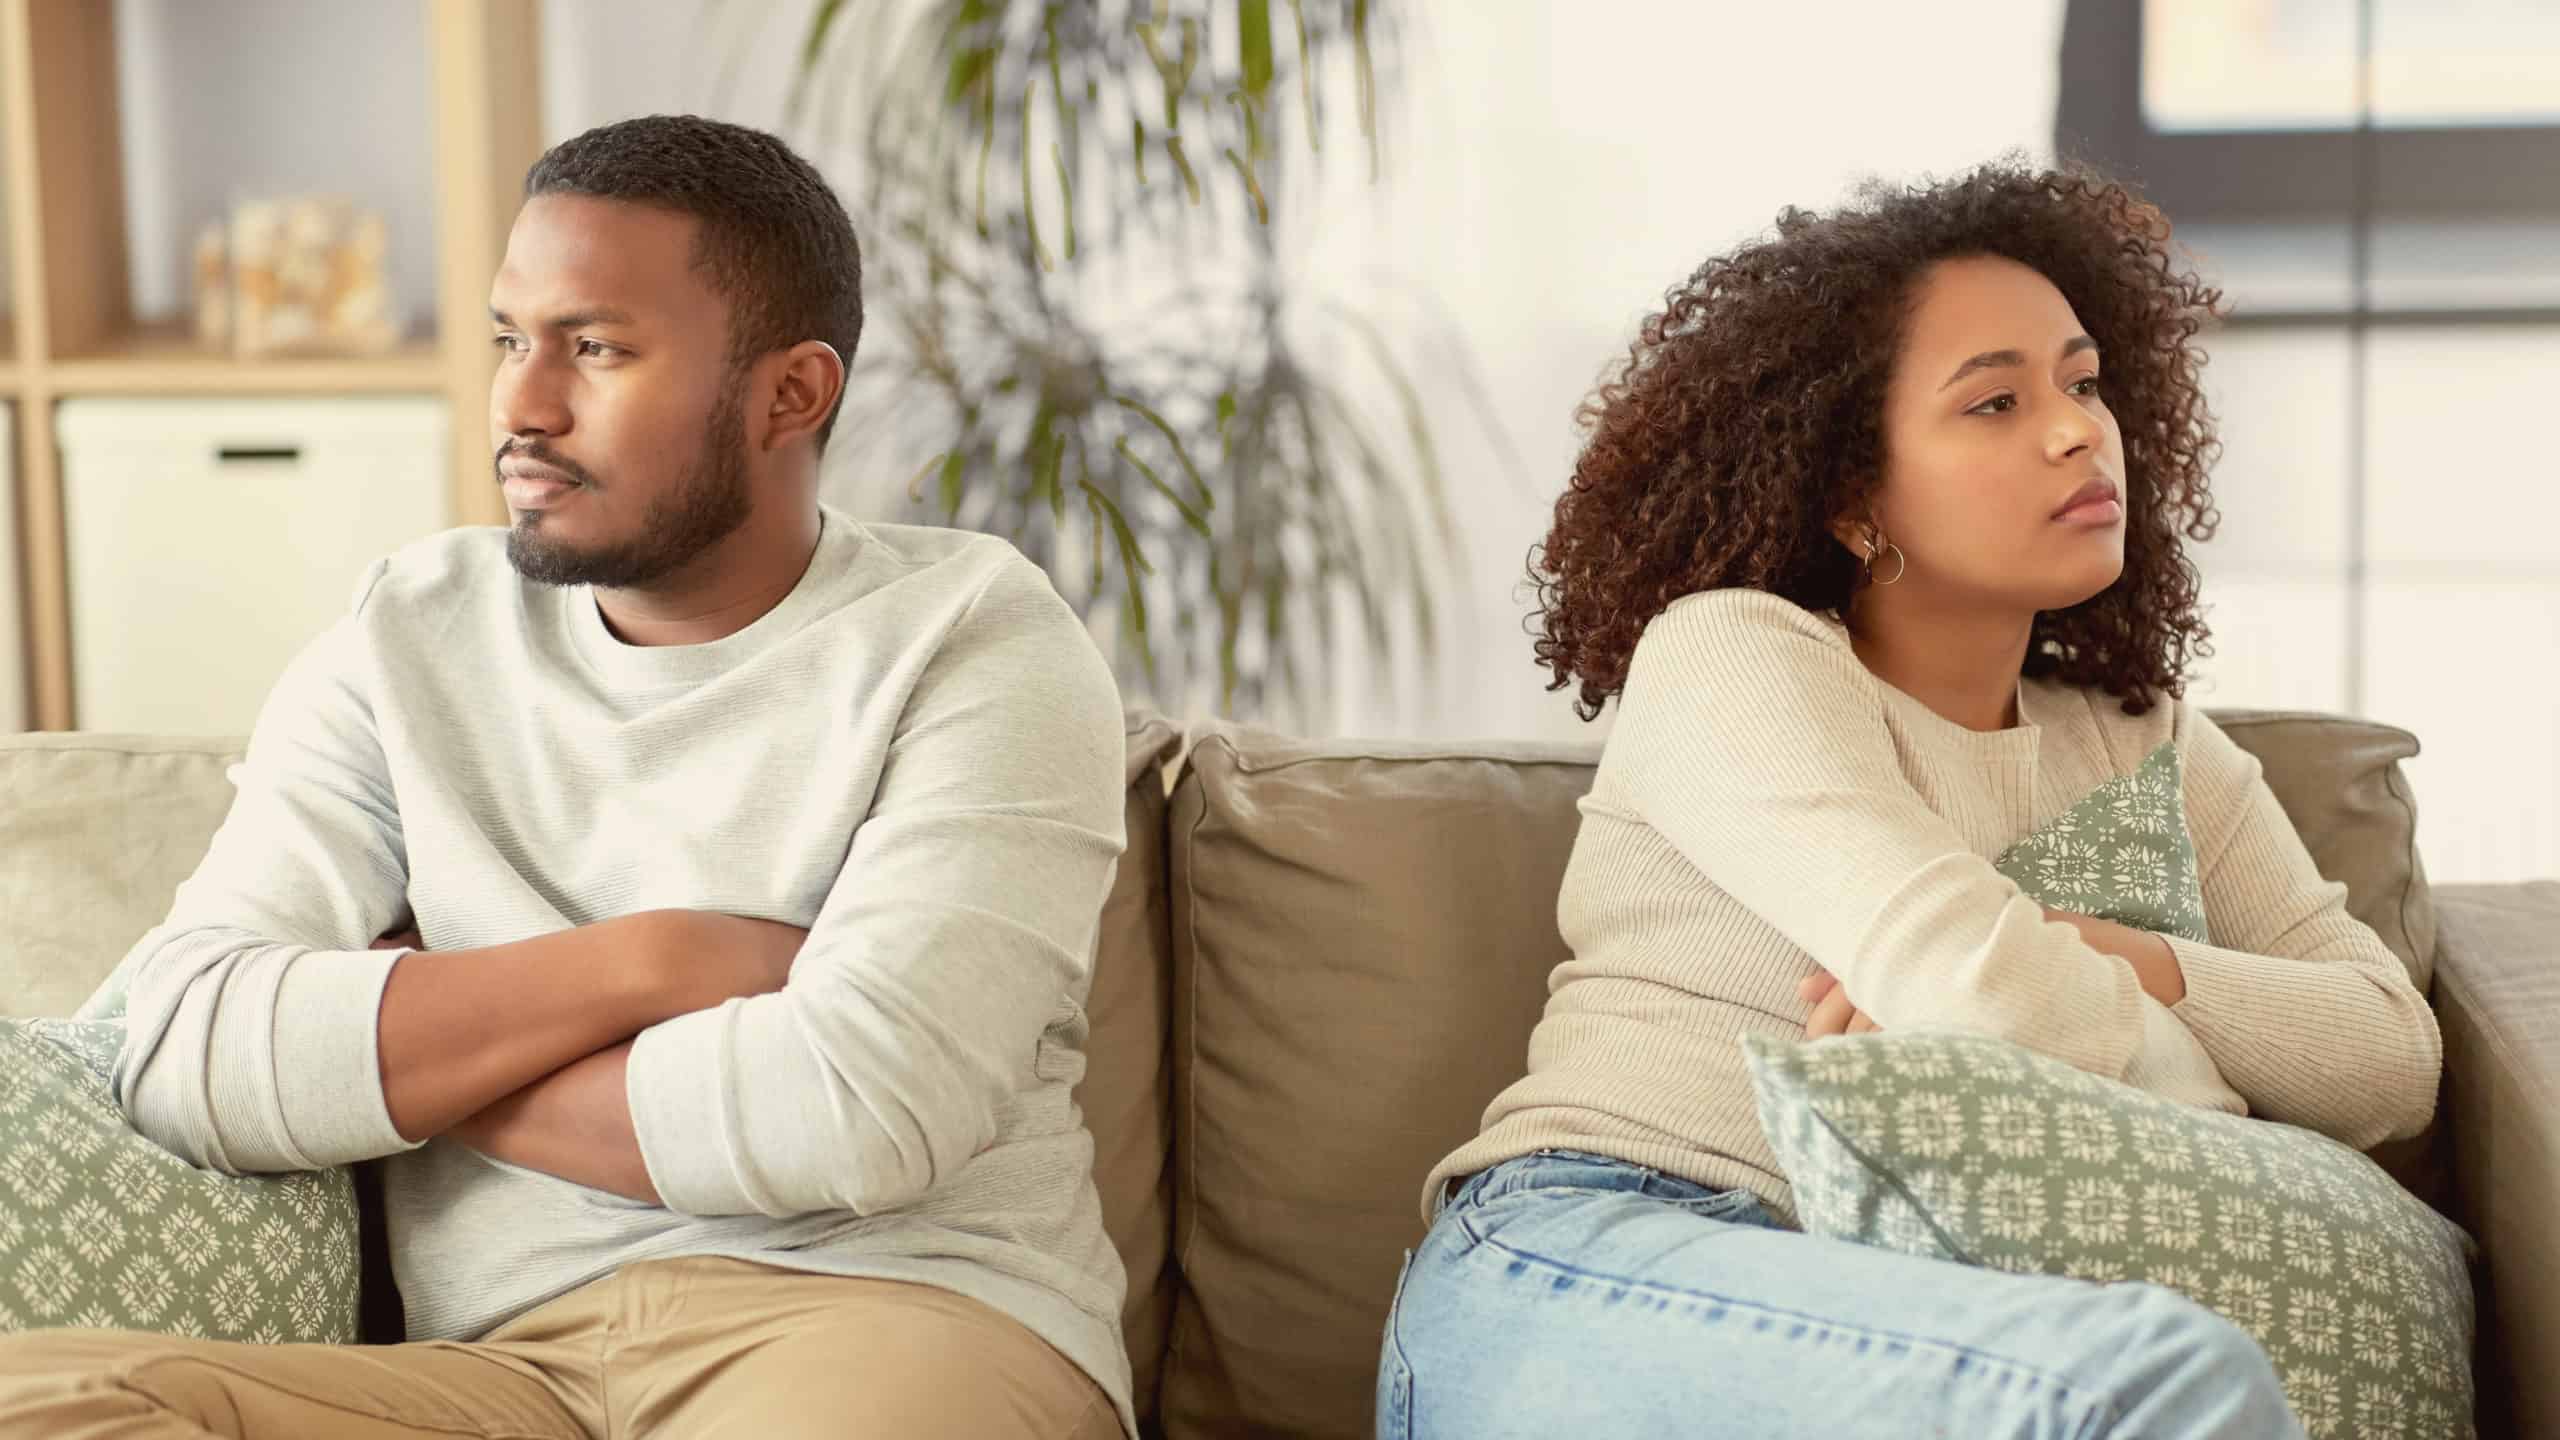 Is Divorce the Right Answer? 15 Questions Couples Should Ask - Focus on the Family